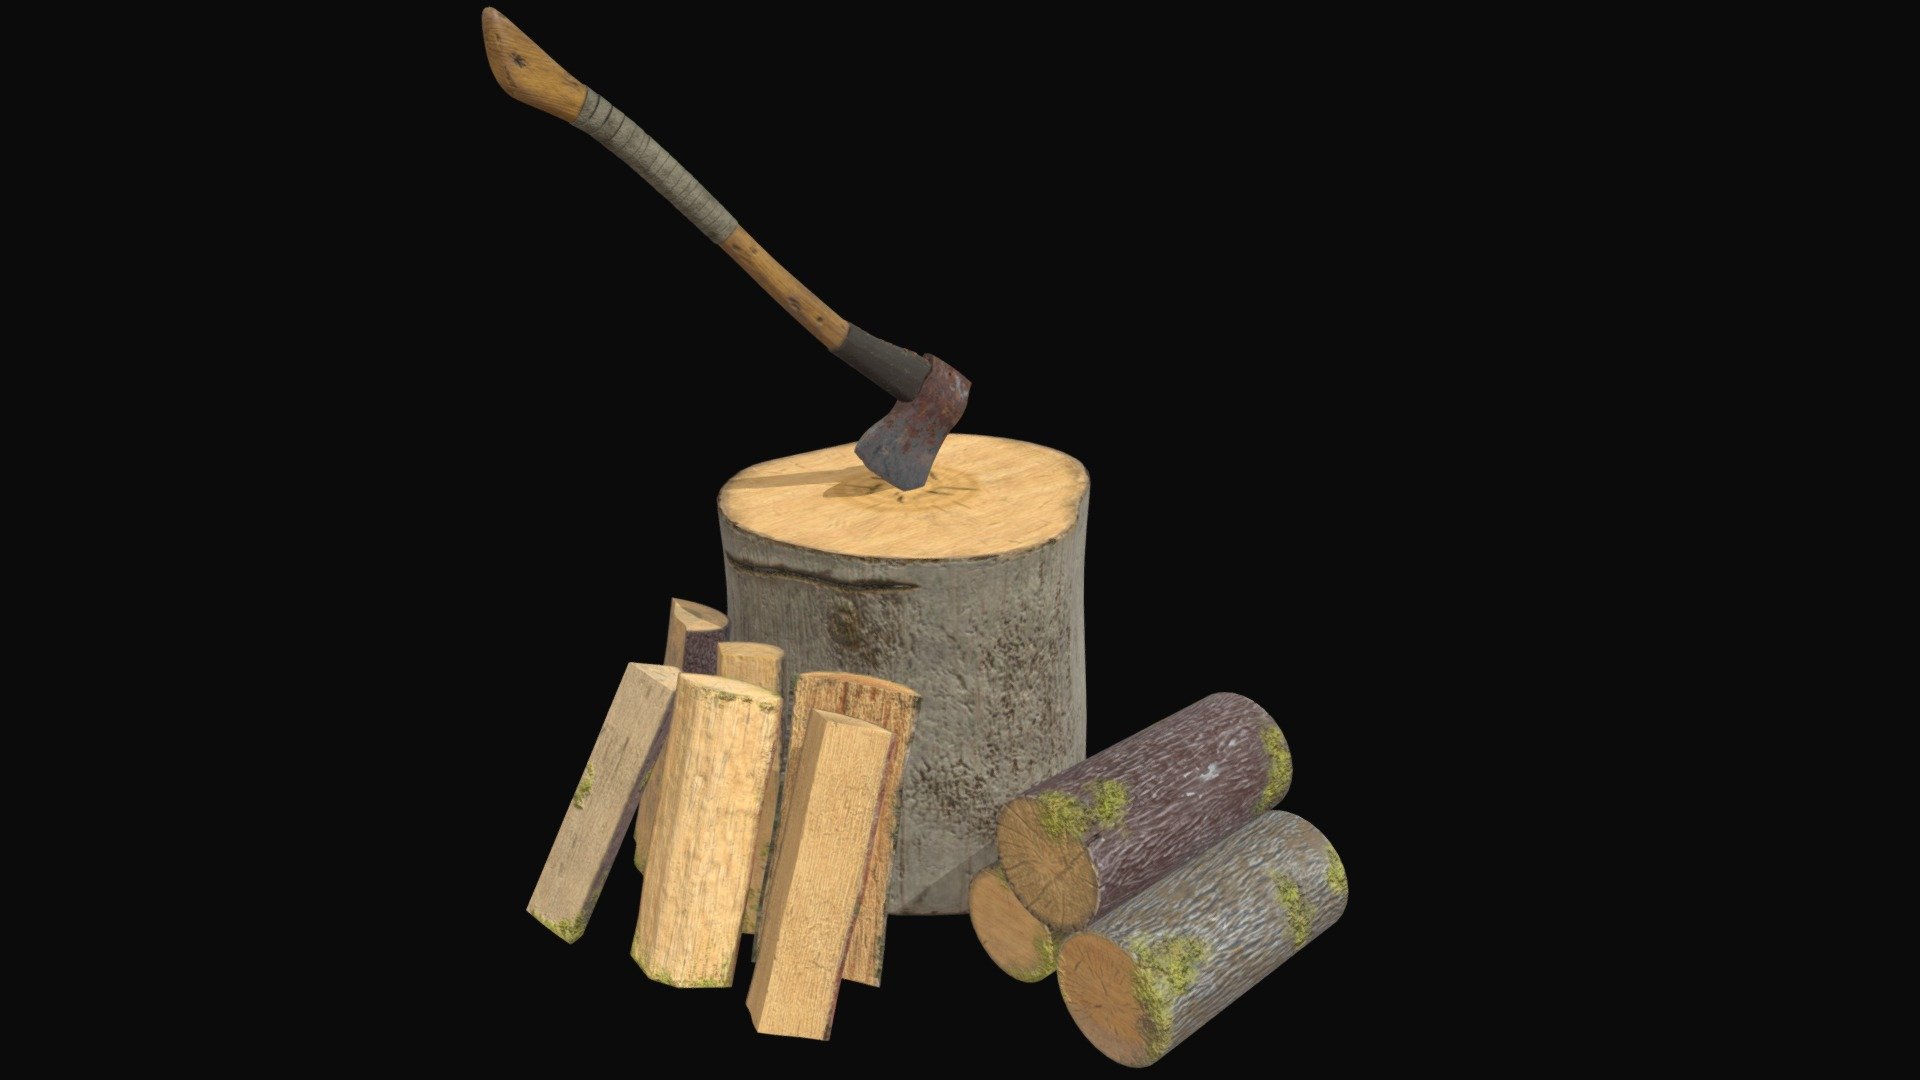 This is a rusty axe, with cut woods log that is a long time without use, that why there condition. 
This asset is a individual pice to compose an outside environment that I’m creating. The resolution of the texture that I create are 4k but because of file size, this model has a lower resolution of textures 3d model